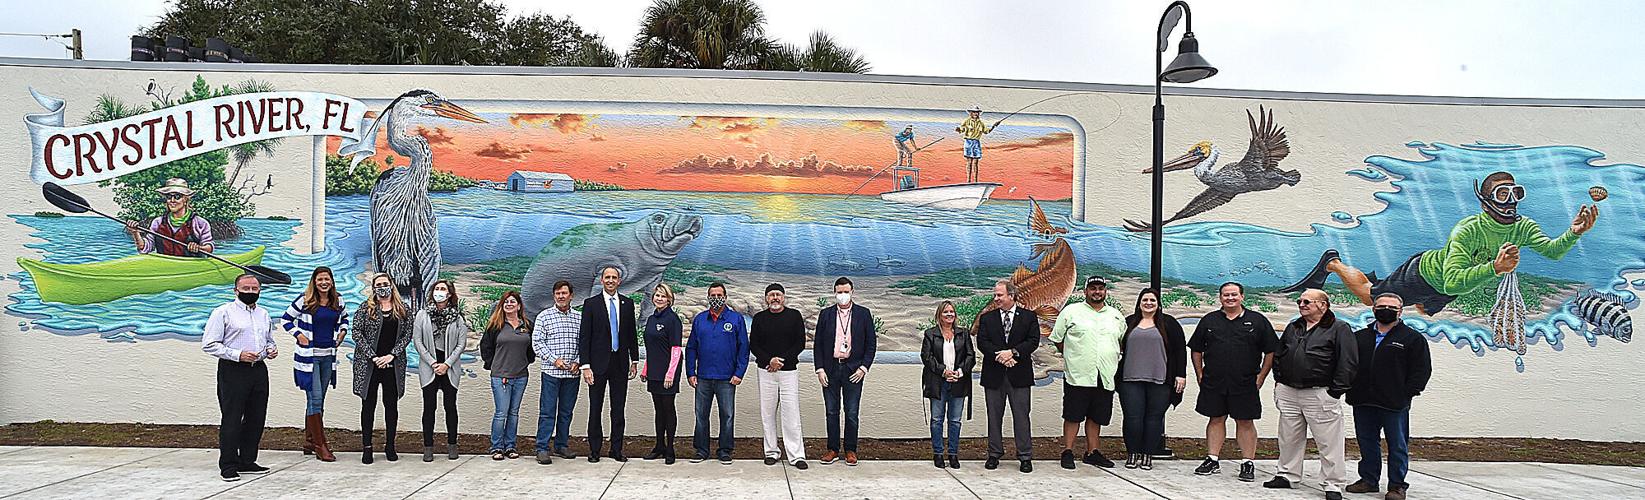 Crystal River Downtown Mural Scenic